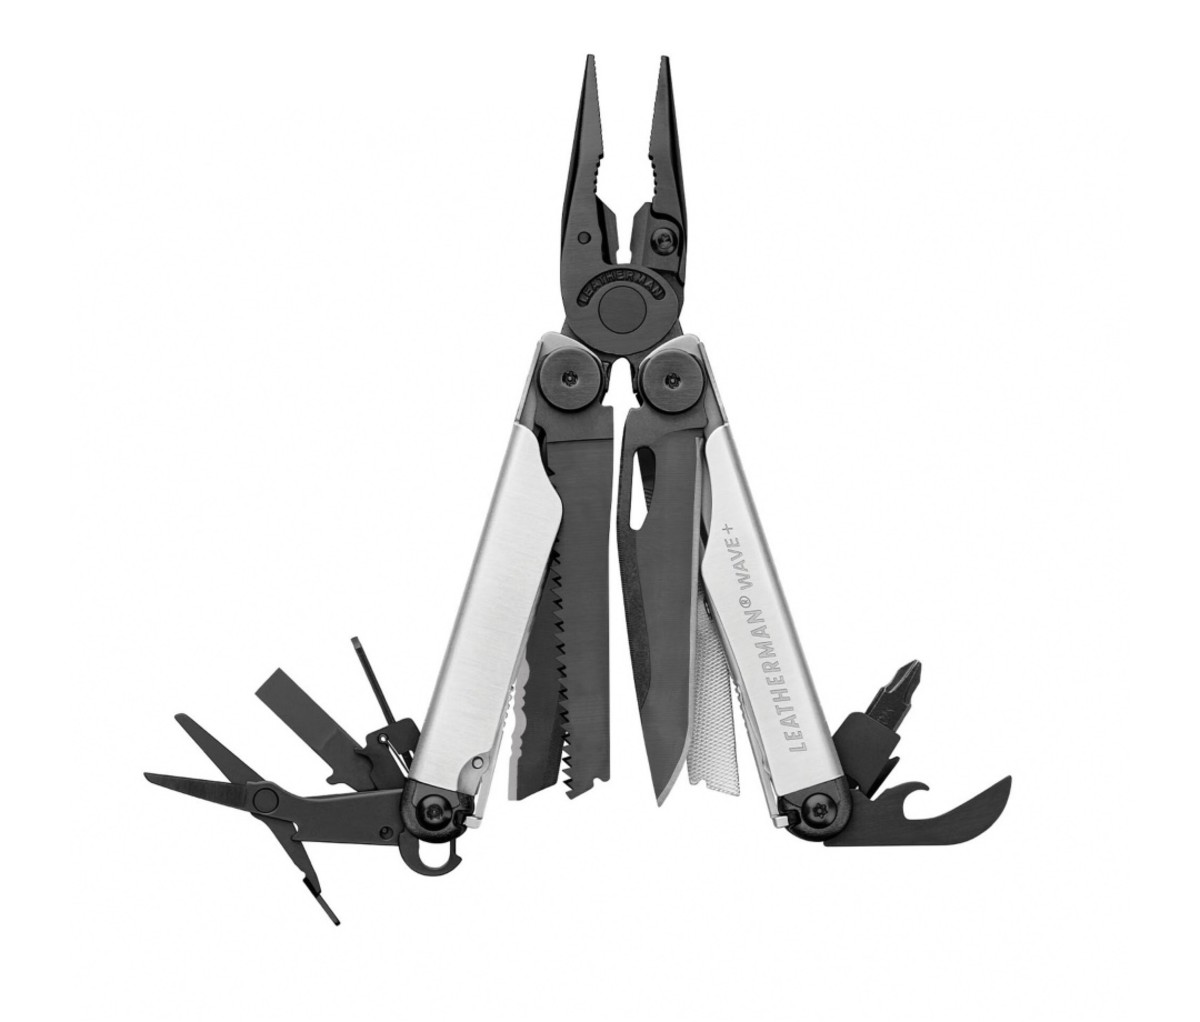 Black and silver multi-tool